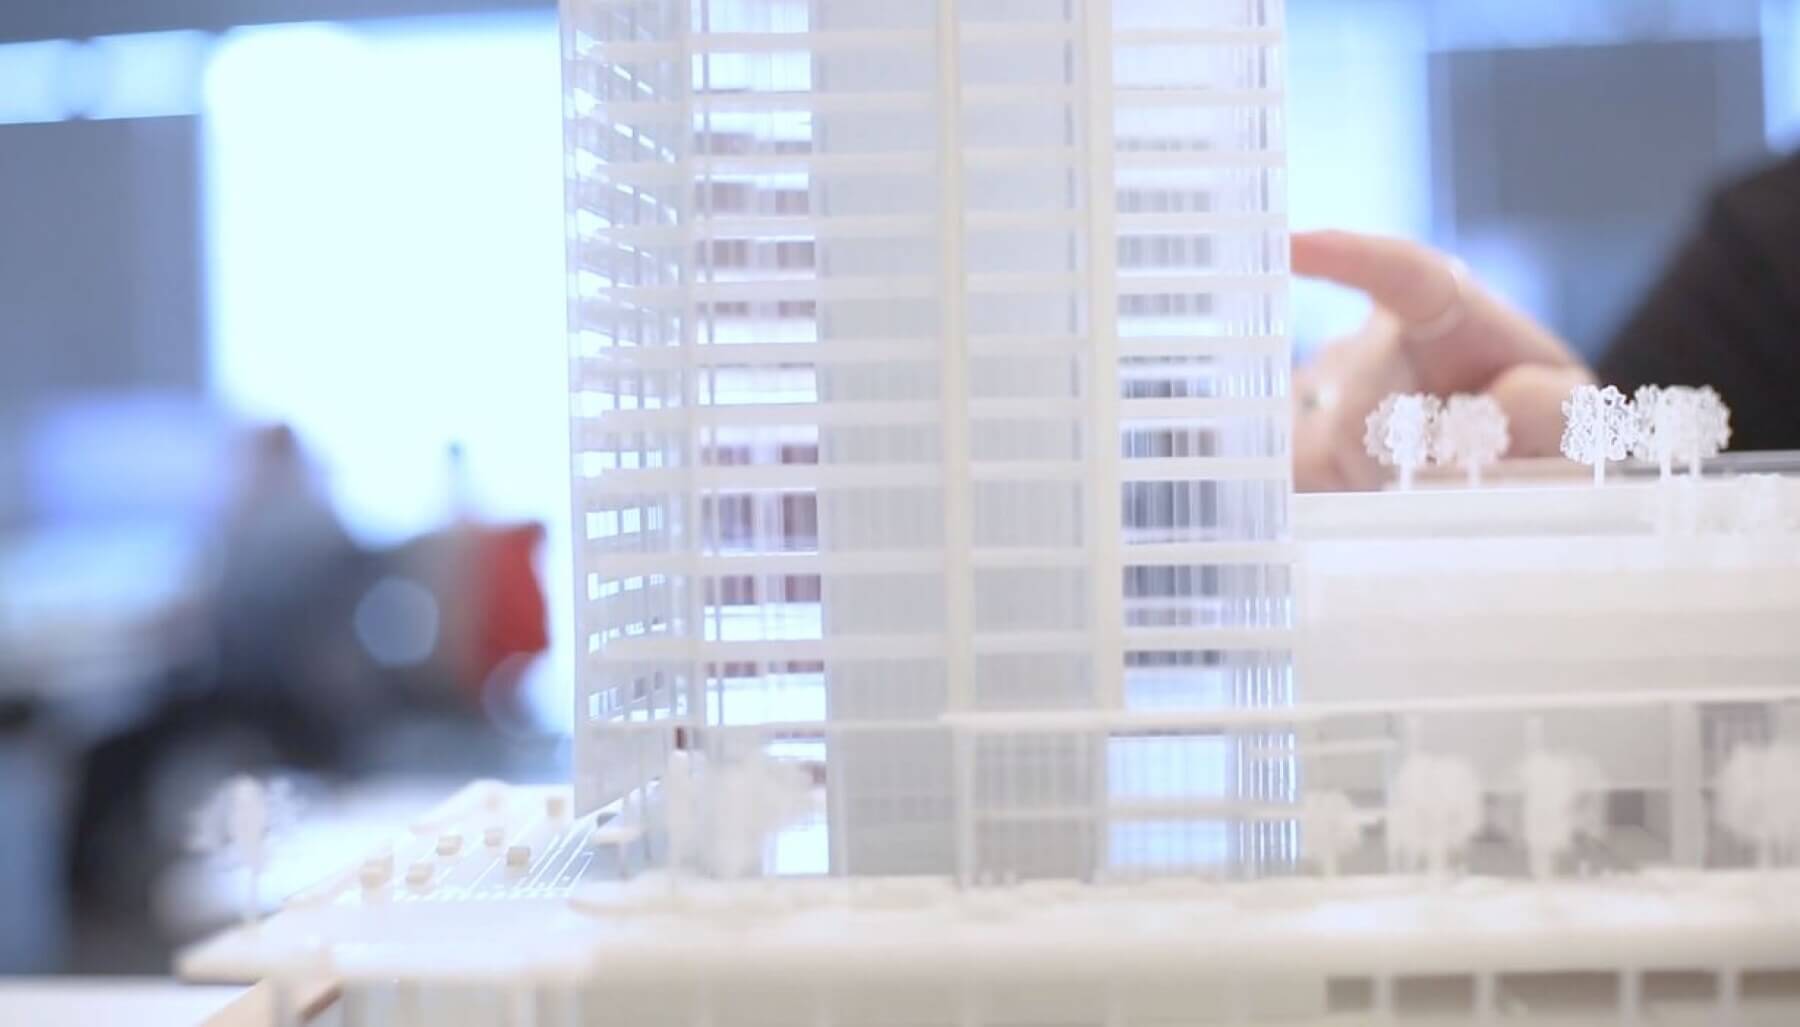 3-D printed model of office building with trees